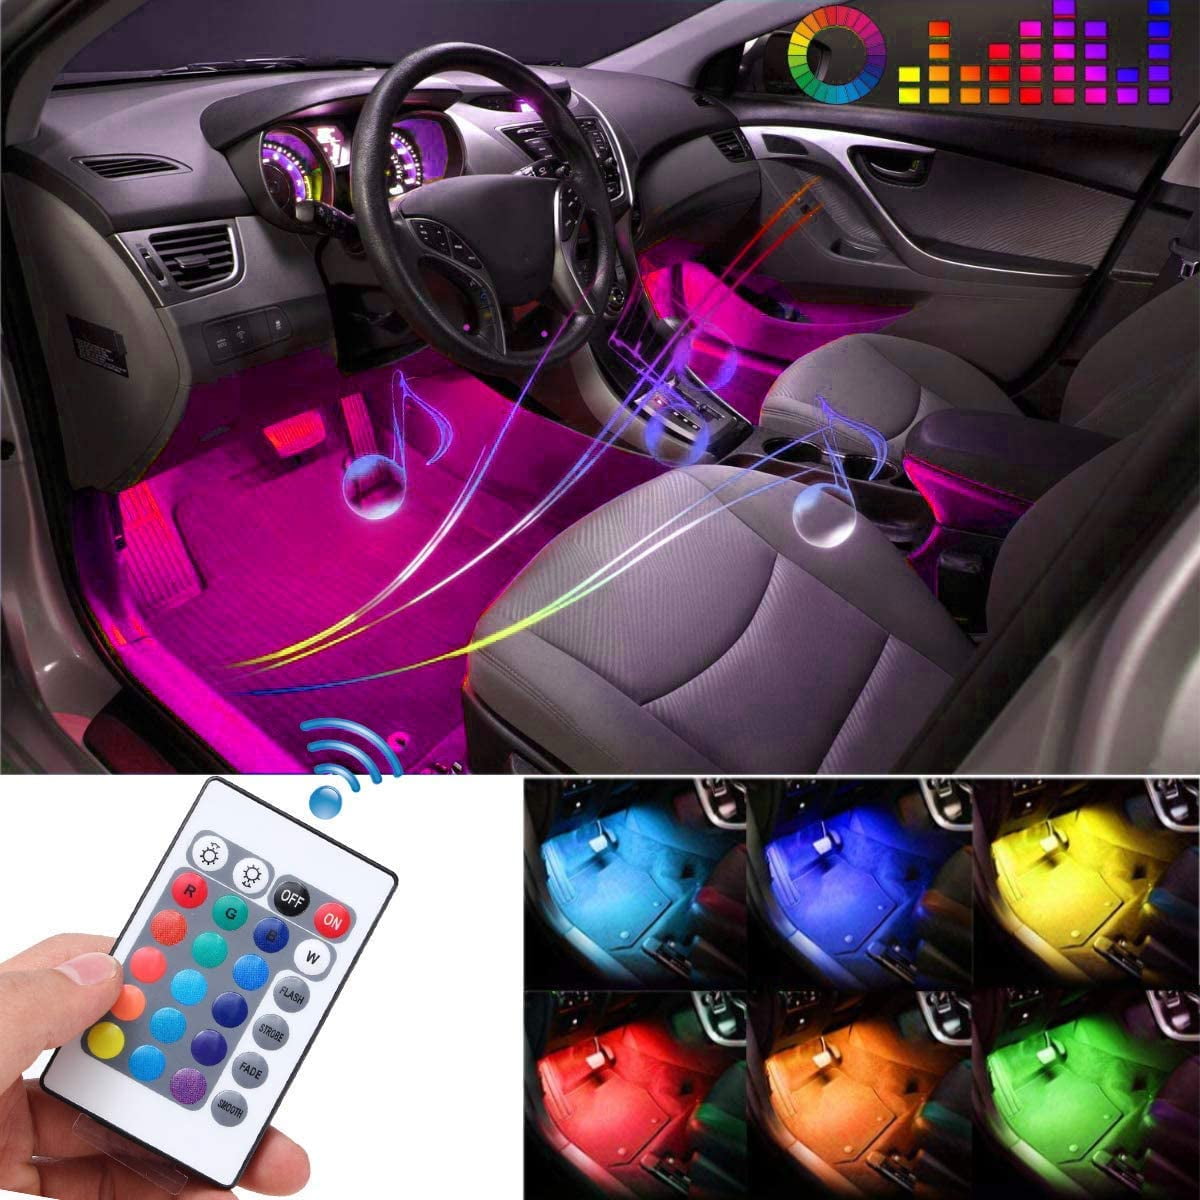 DC 12V Car Charger Included Car LED Strip Light SIZZLEAUTO 4pcs 36 LED Multicolor Music Car Interior Lights Under Dash Lighting Waterproof Kit with Sound Active Function and Wireless Remote Control 